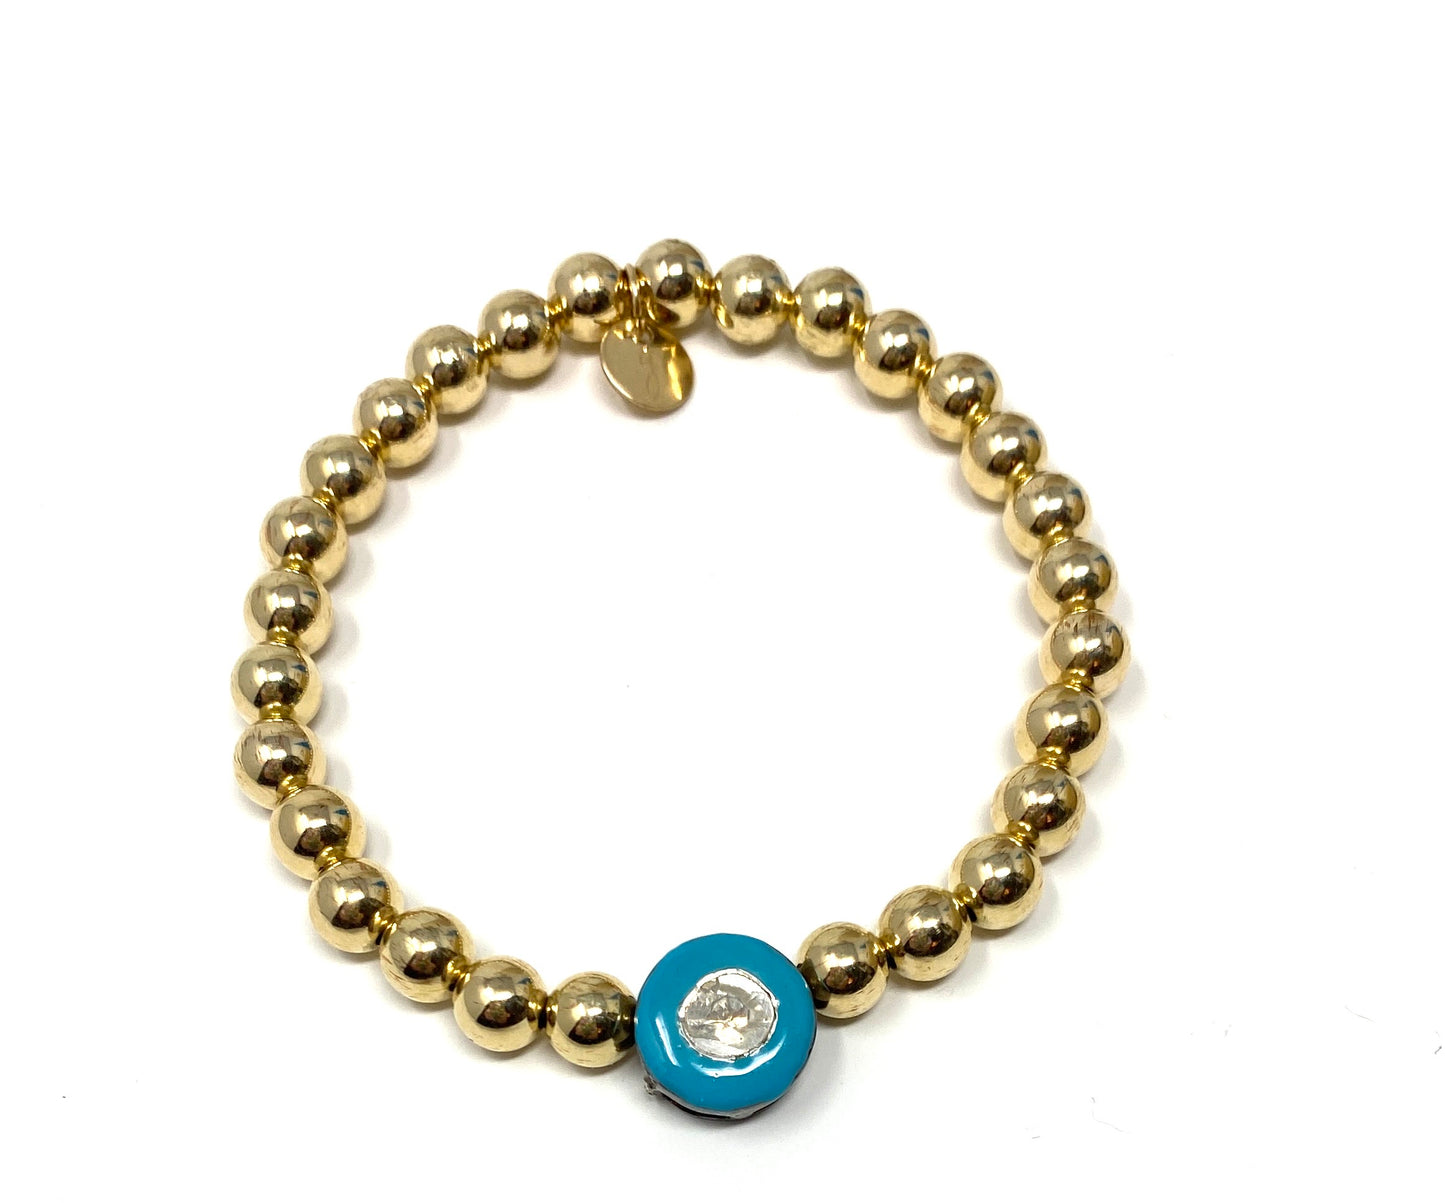 6mm Gold Filled Elastic Beaded Bracelets With Enamel and Polki Diamond Connector